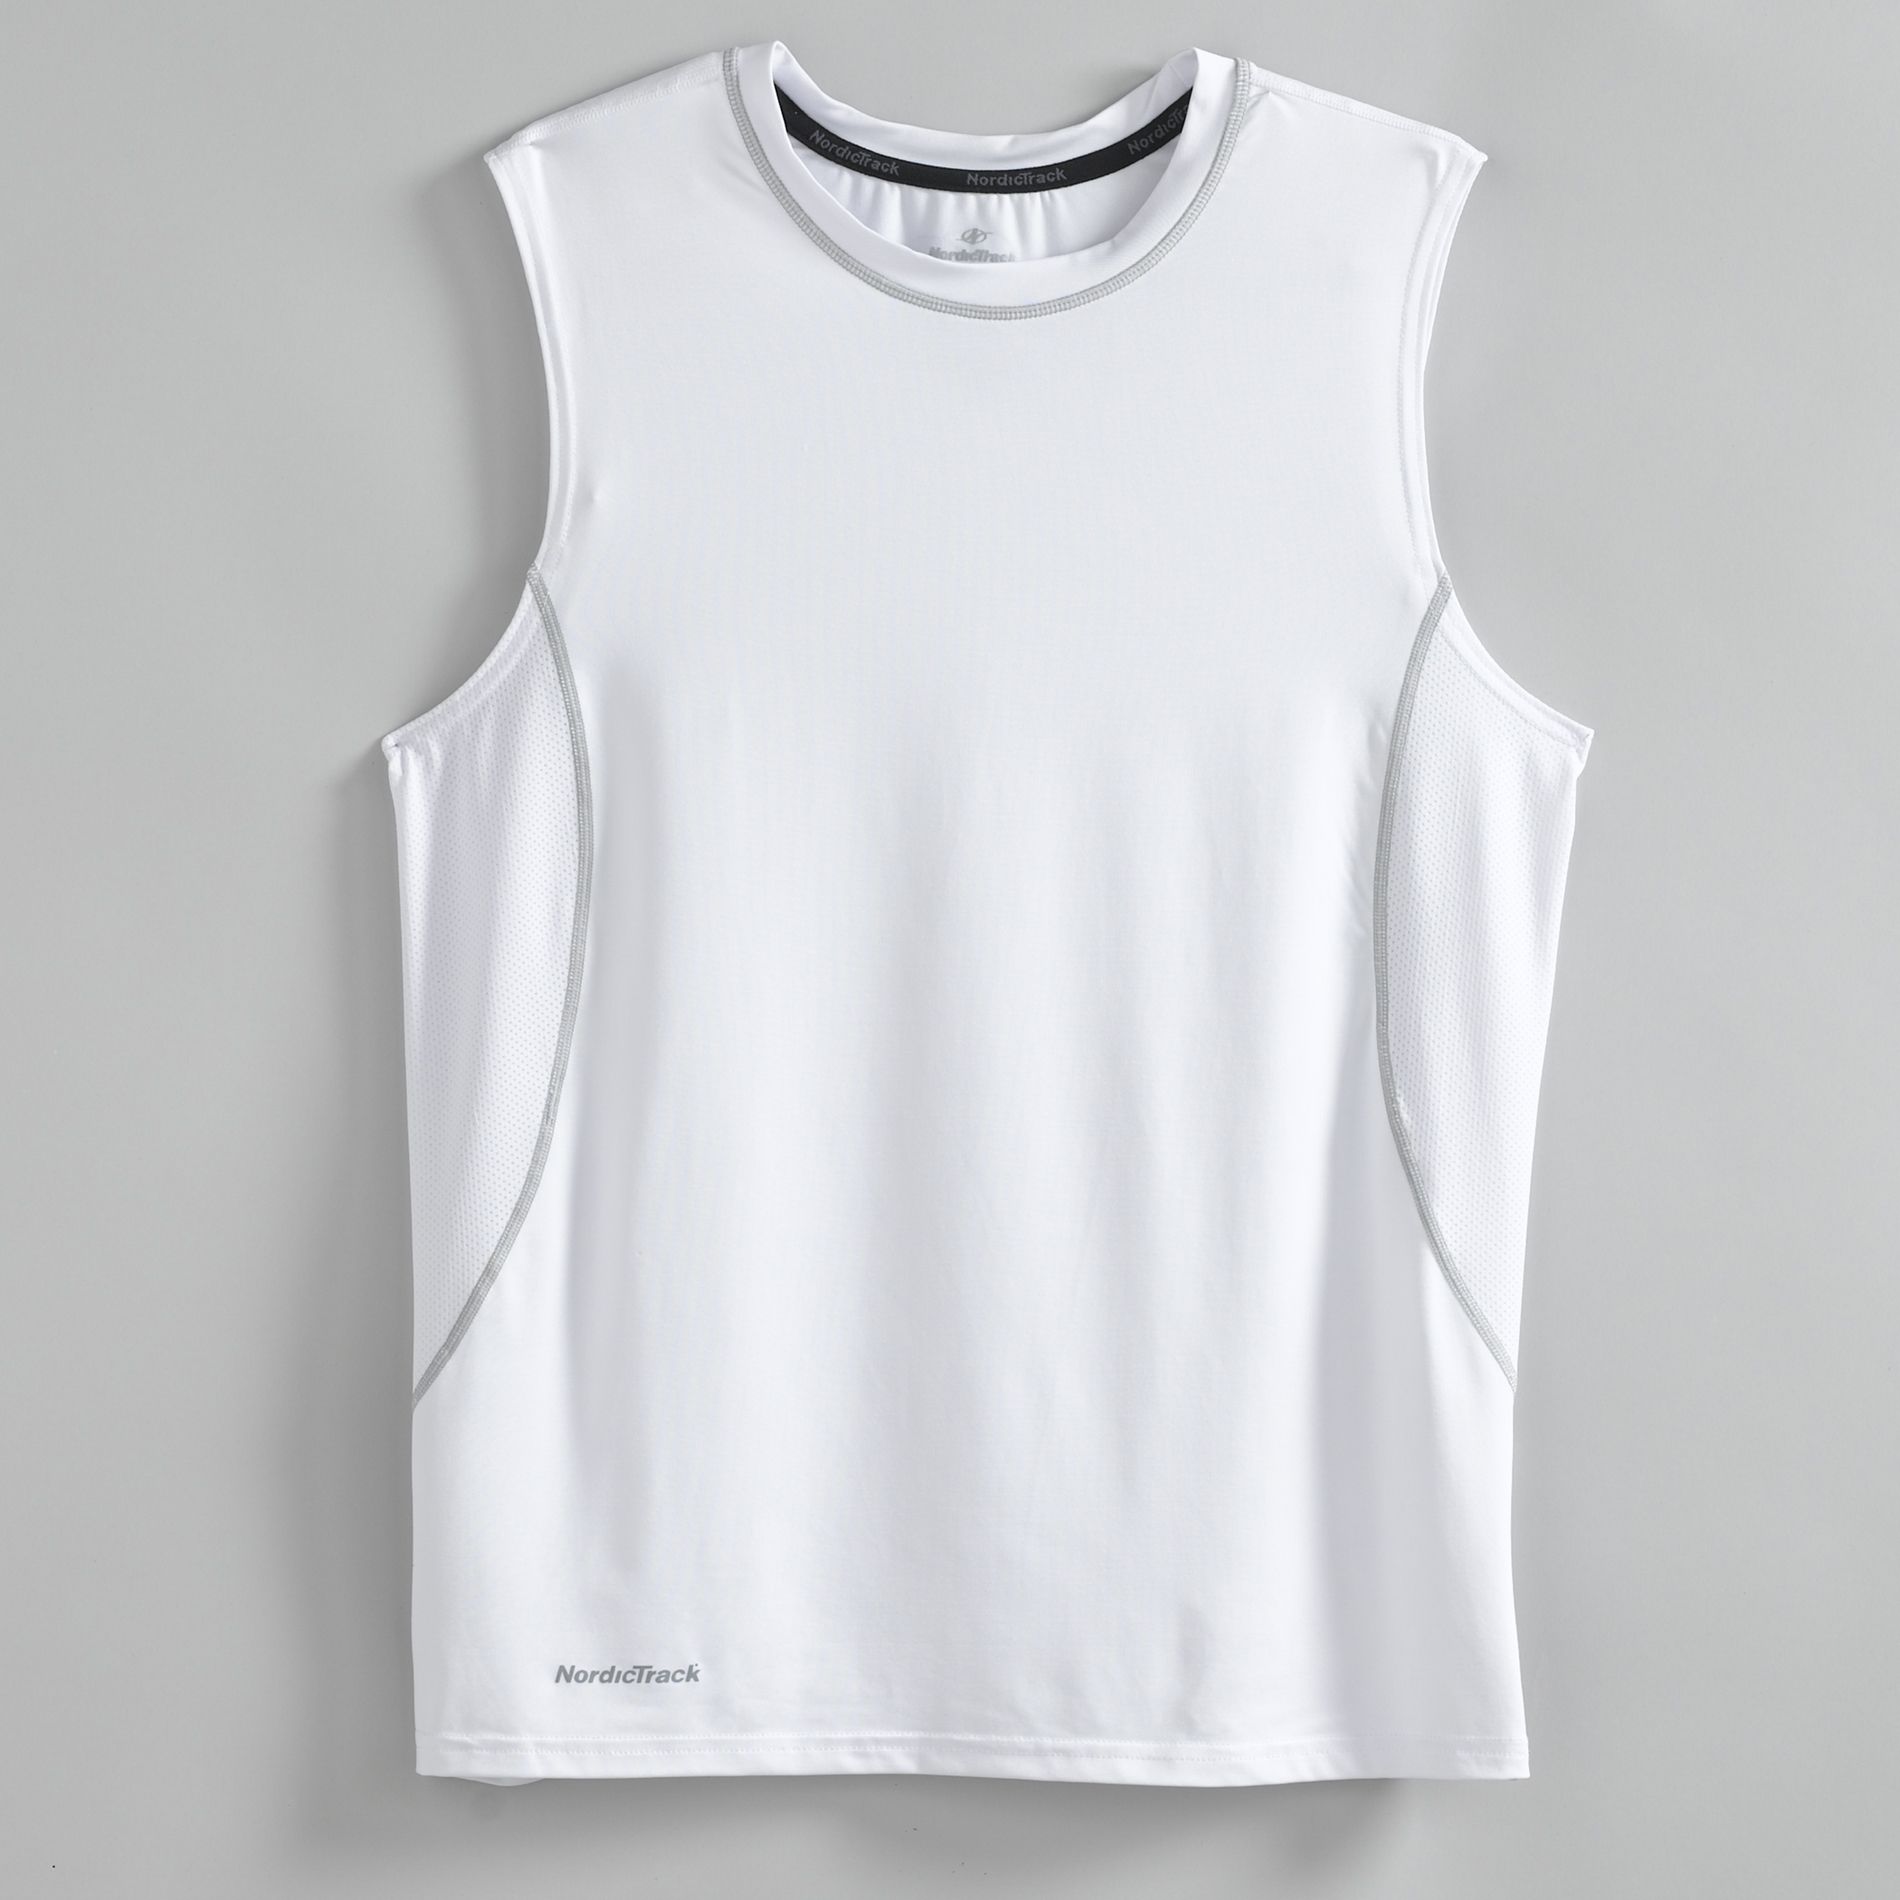 NordicTrack Performance Wear Muscle Tee